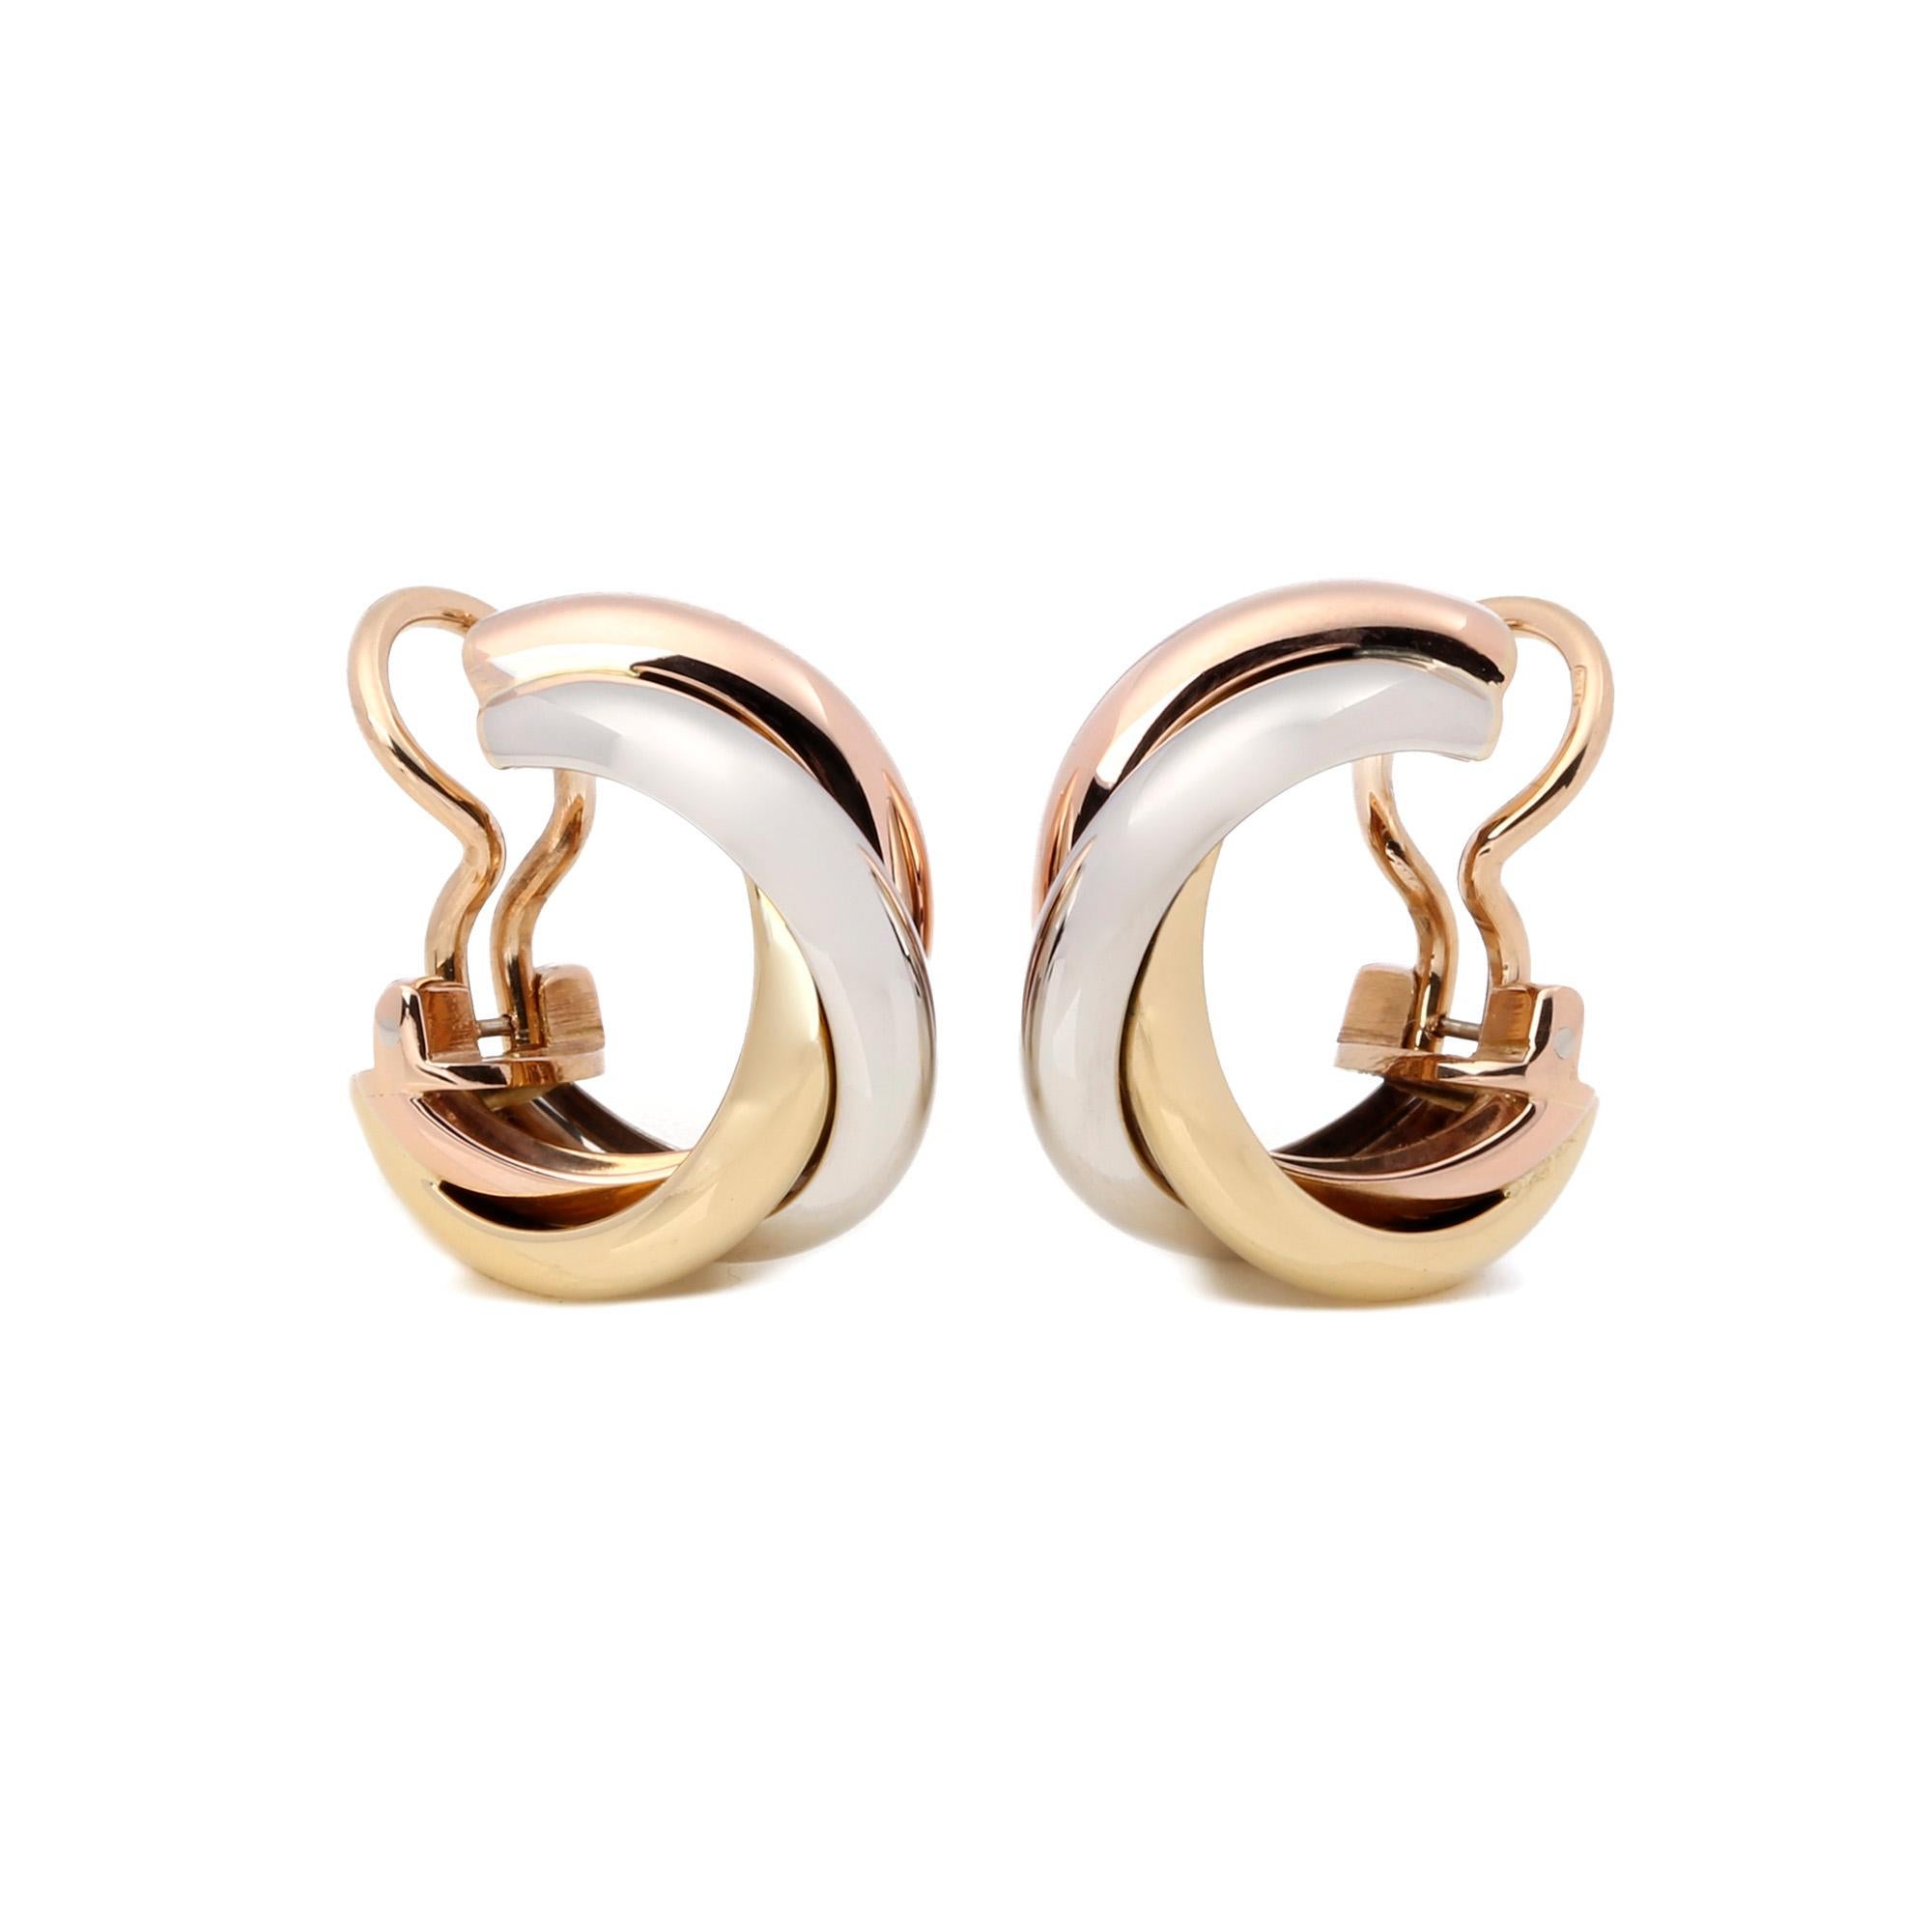 These earrings by Cartier are from their Trinity collection and feature a twisted design in tri colour 18ct gold with a clip on back. Complete with a Cartier box. Our Xupes reference is COMJ590 should you need to quote this. 